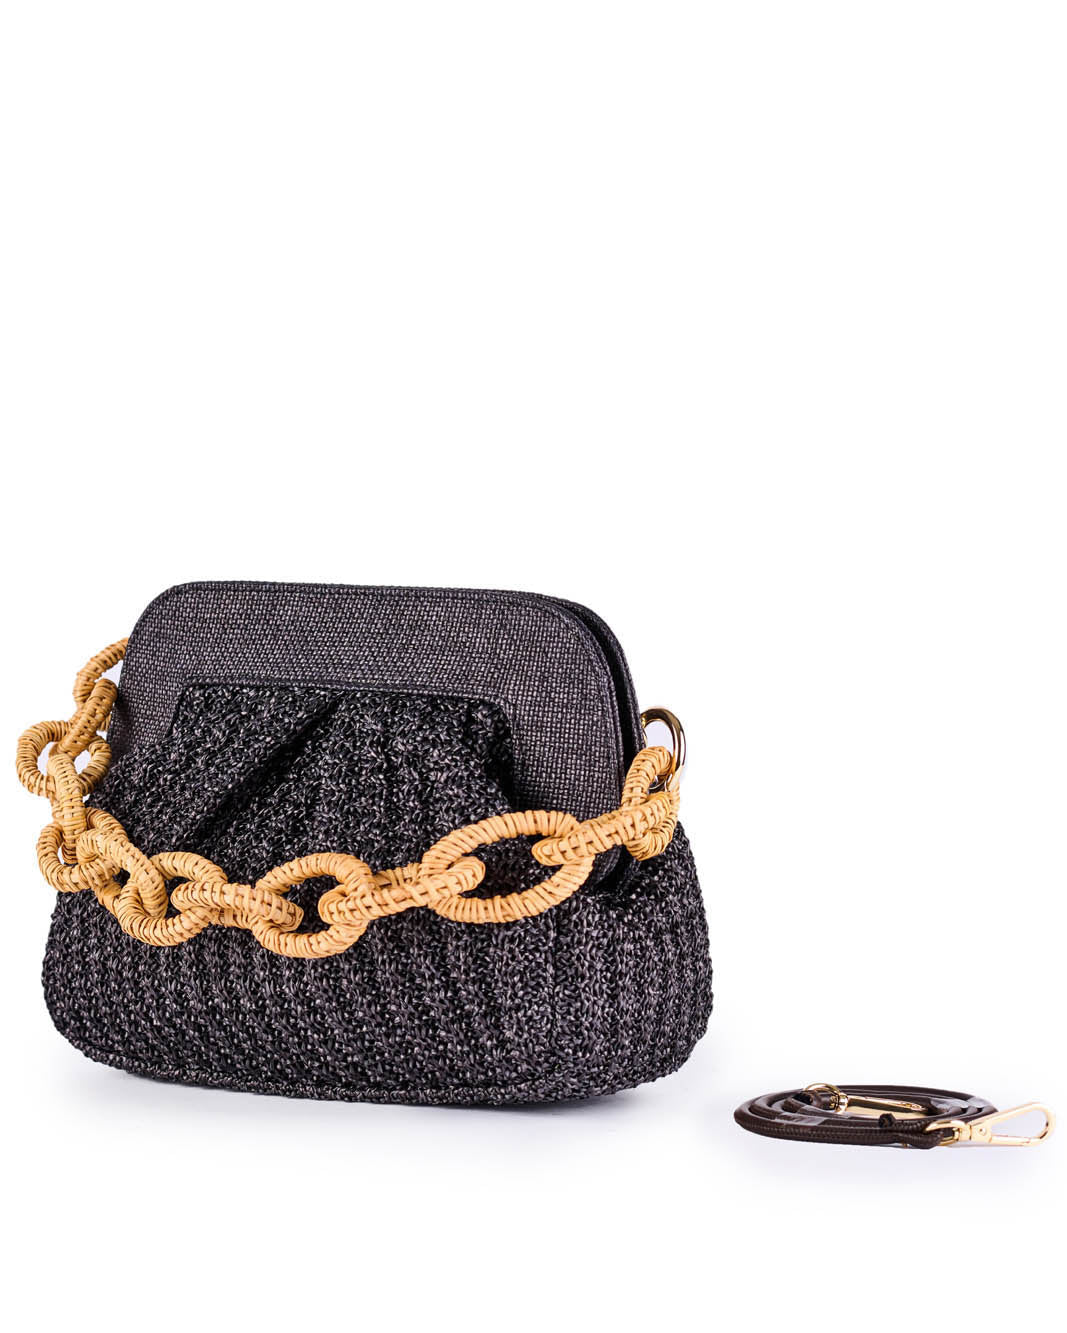 Black textured handbag with large woven tan chain strap and detachable black strap